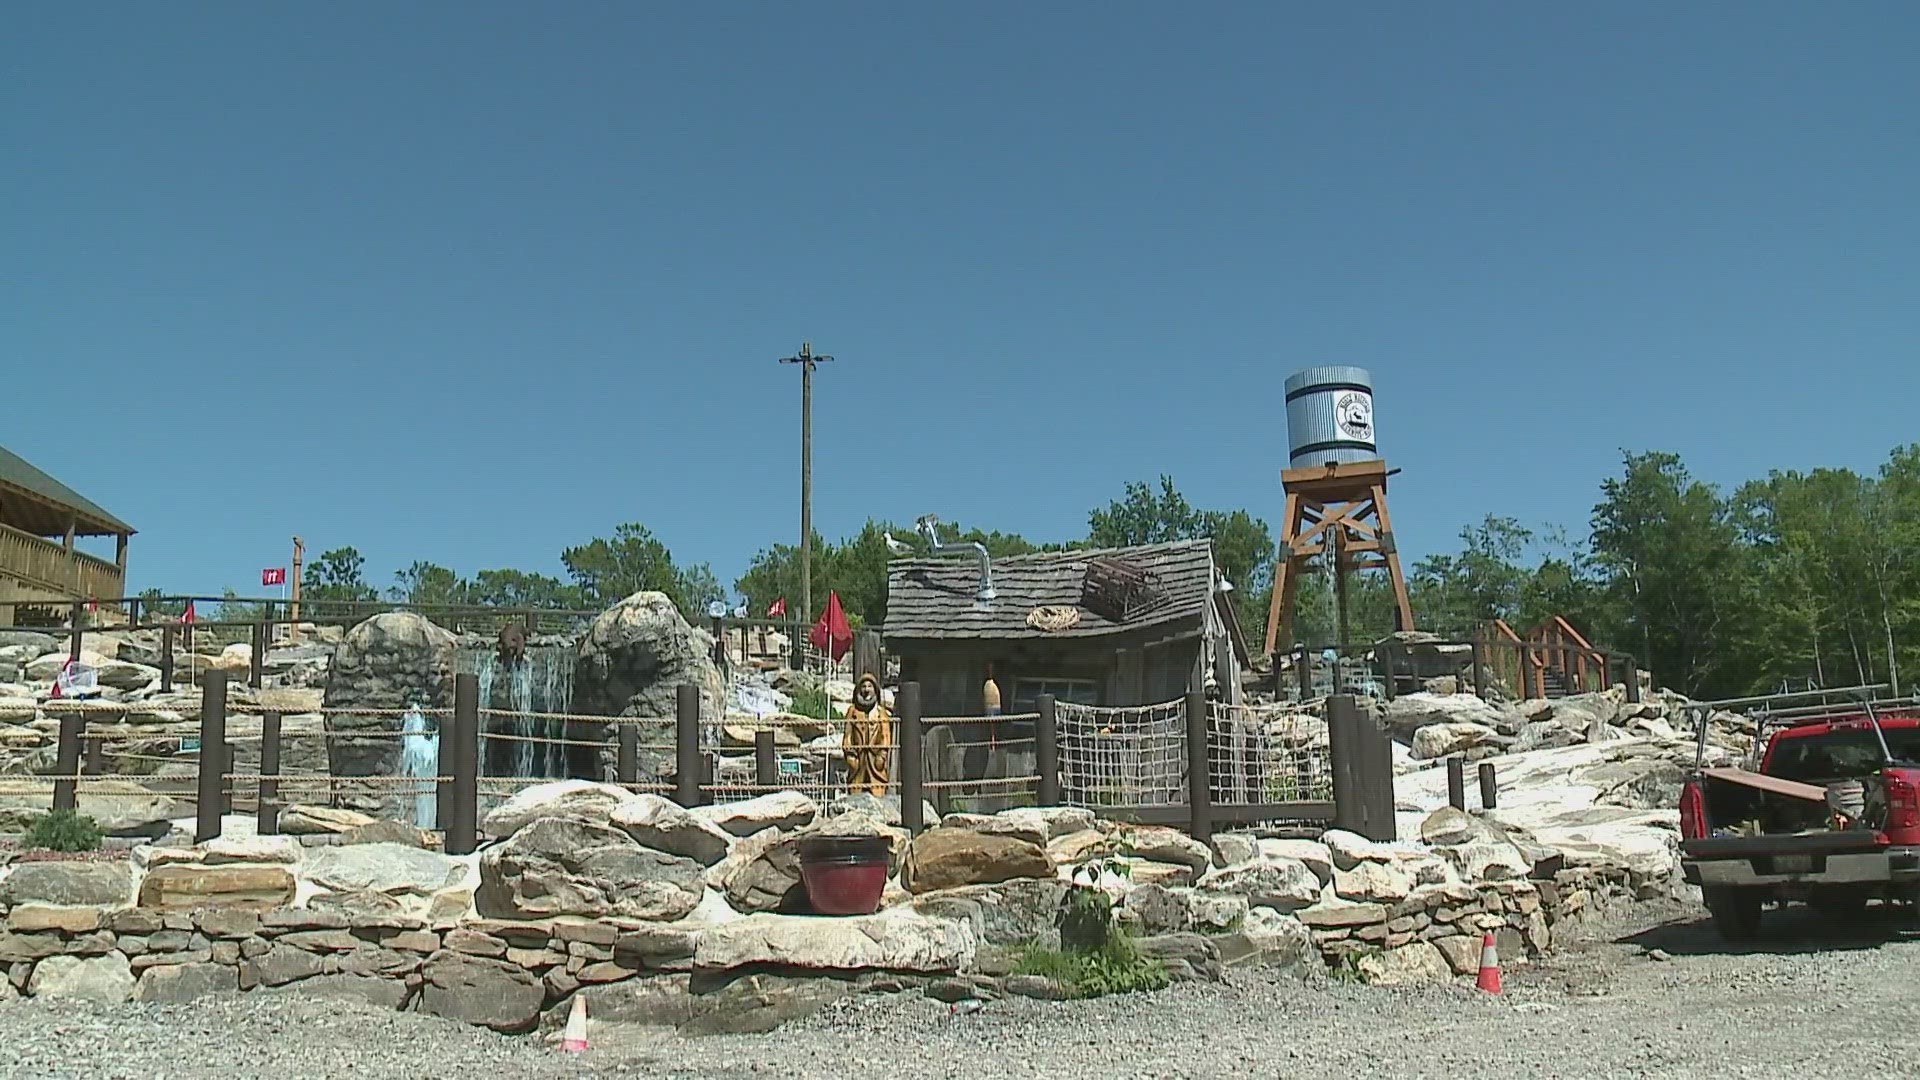 Moose Mountain Mini Golf has a theme of all things Maine and the Maine wilderness, and it's right off I-295.